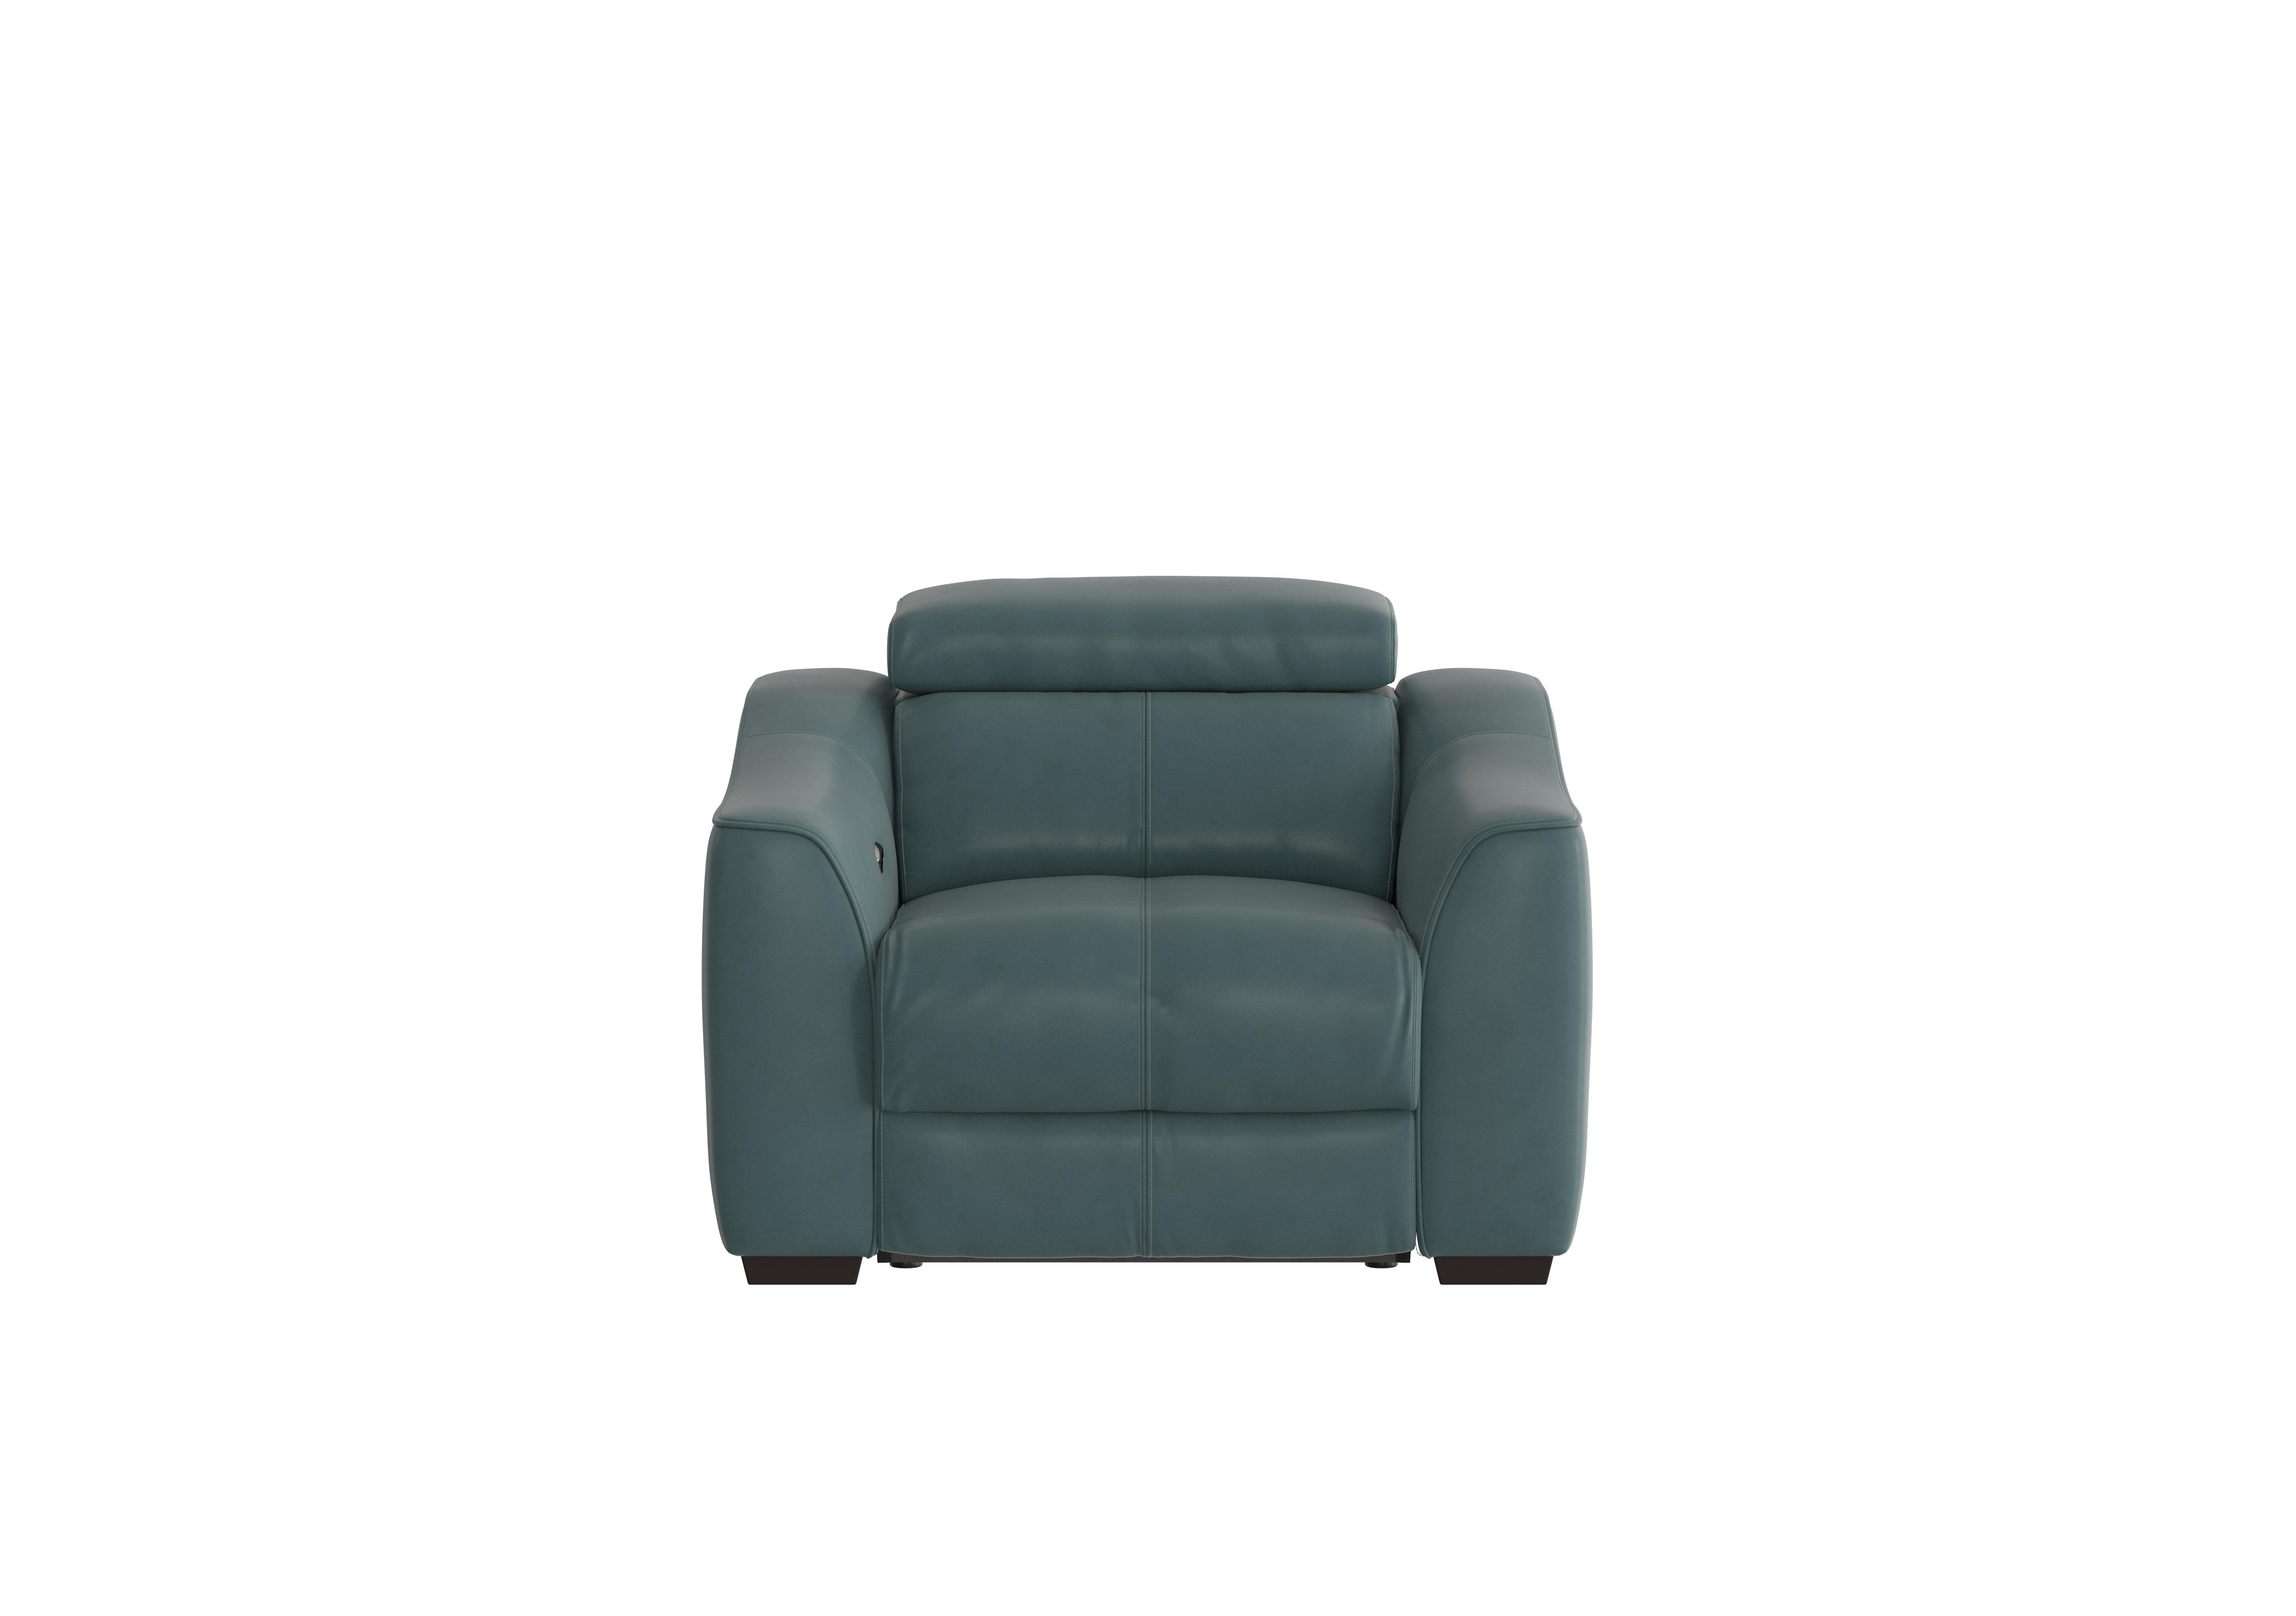 Elixir Leather Armchair in Bv-301e Lake Green on Furniture Village